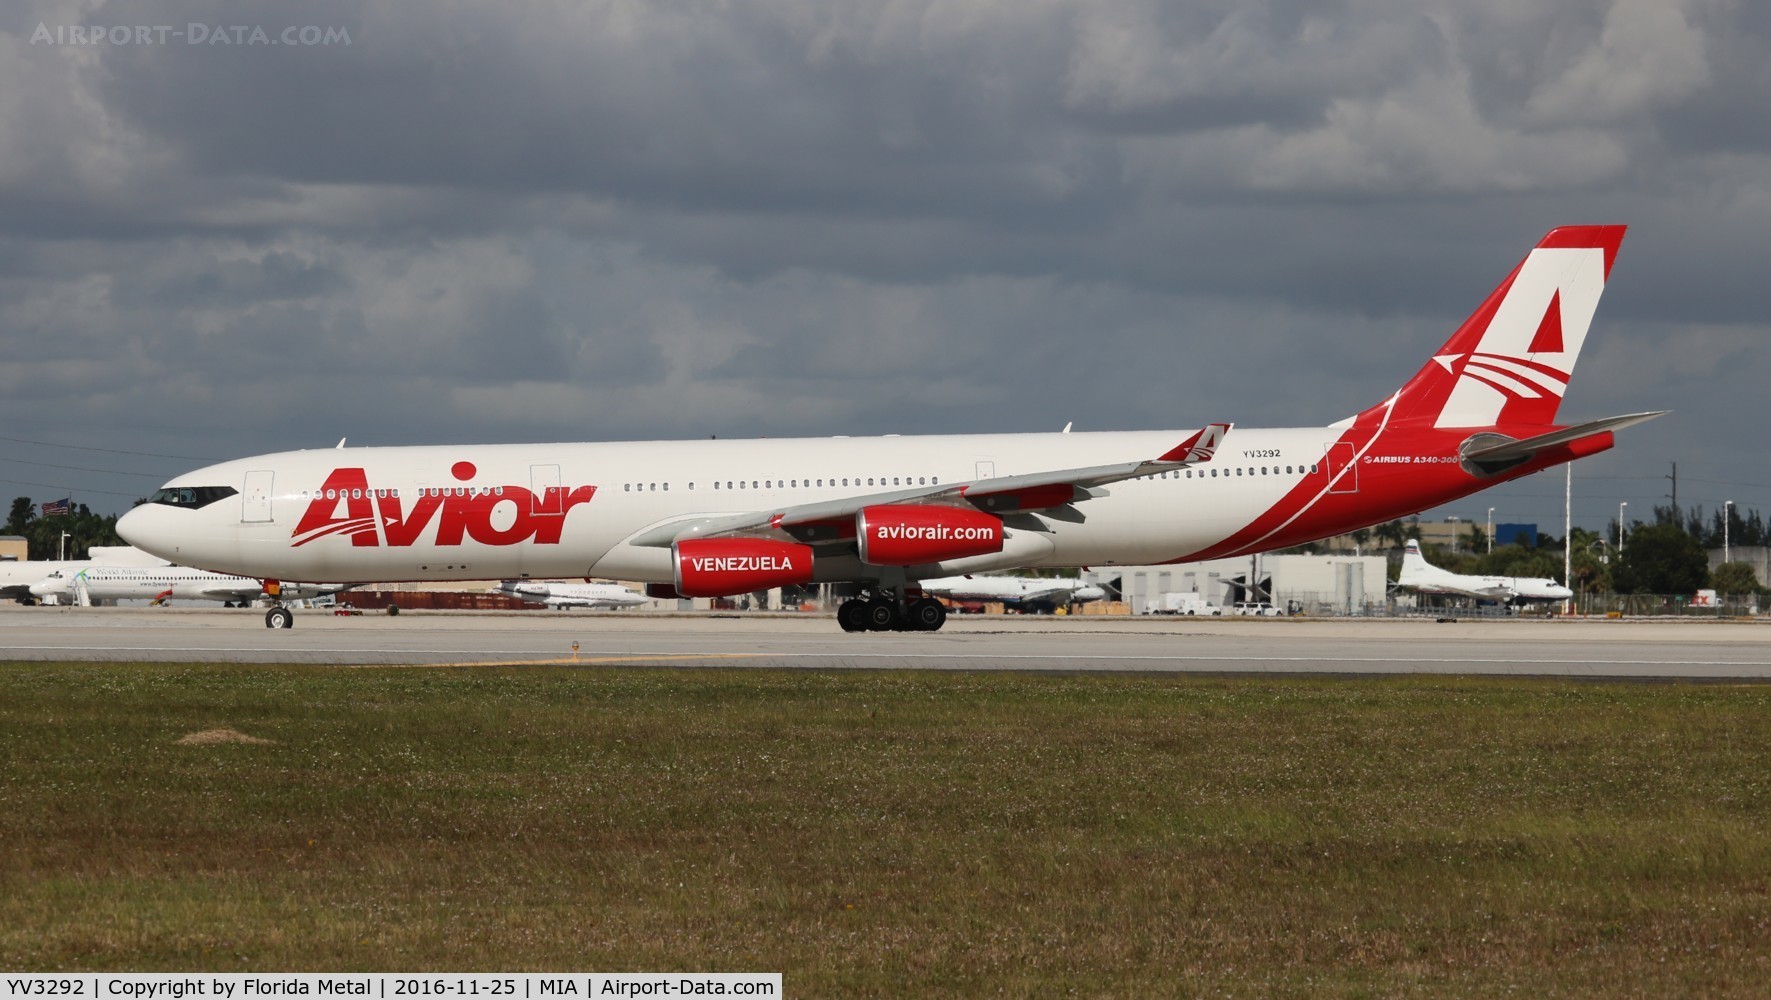 YV3292, 1997 Airbus A340-313 C/N 199, Avior Airlines